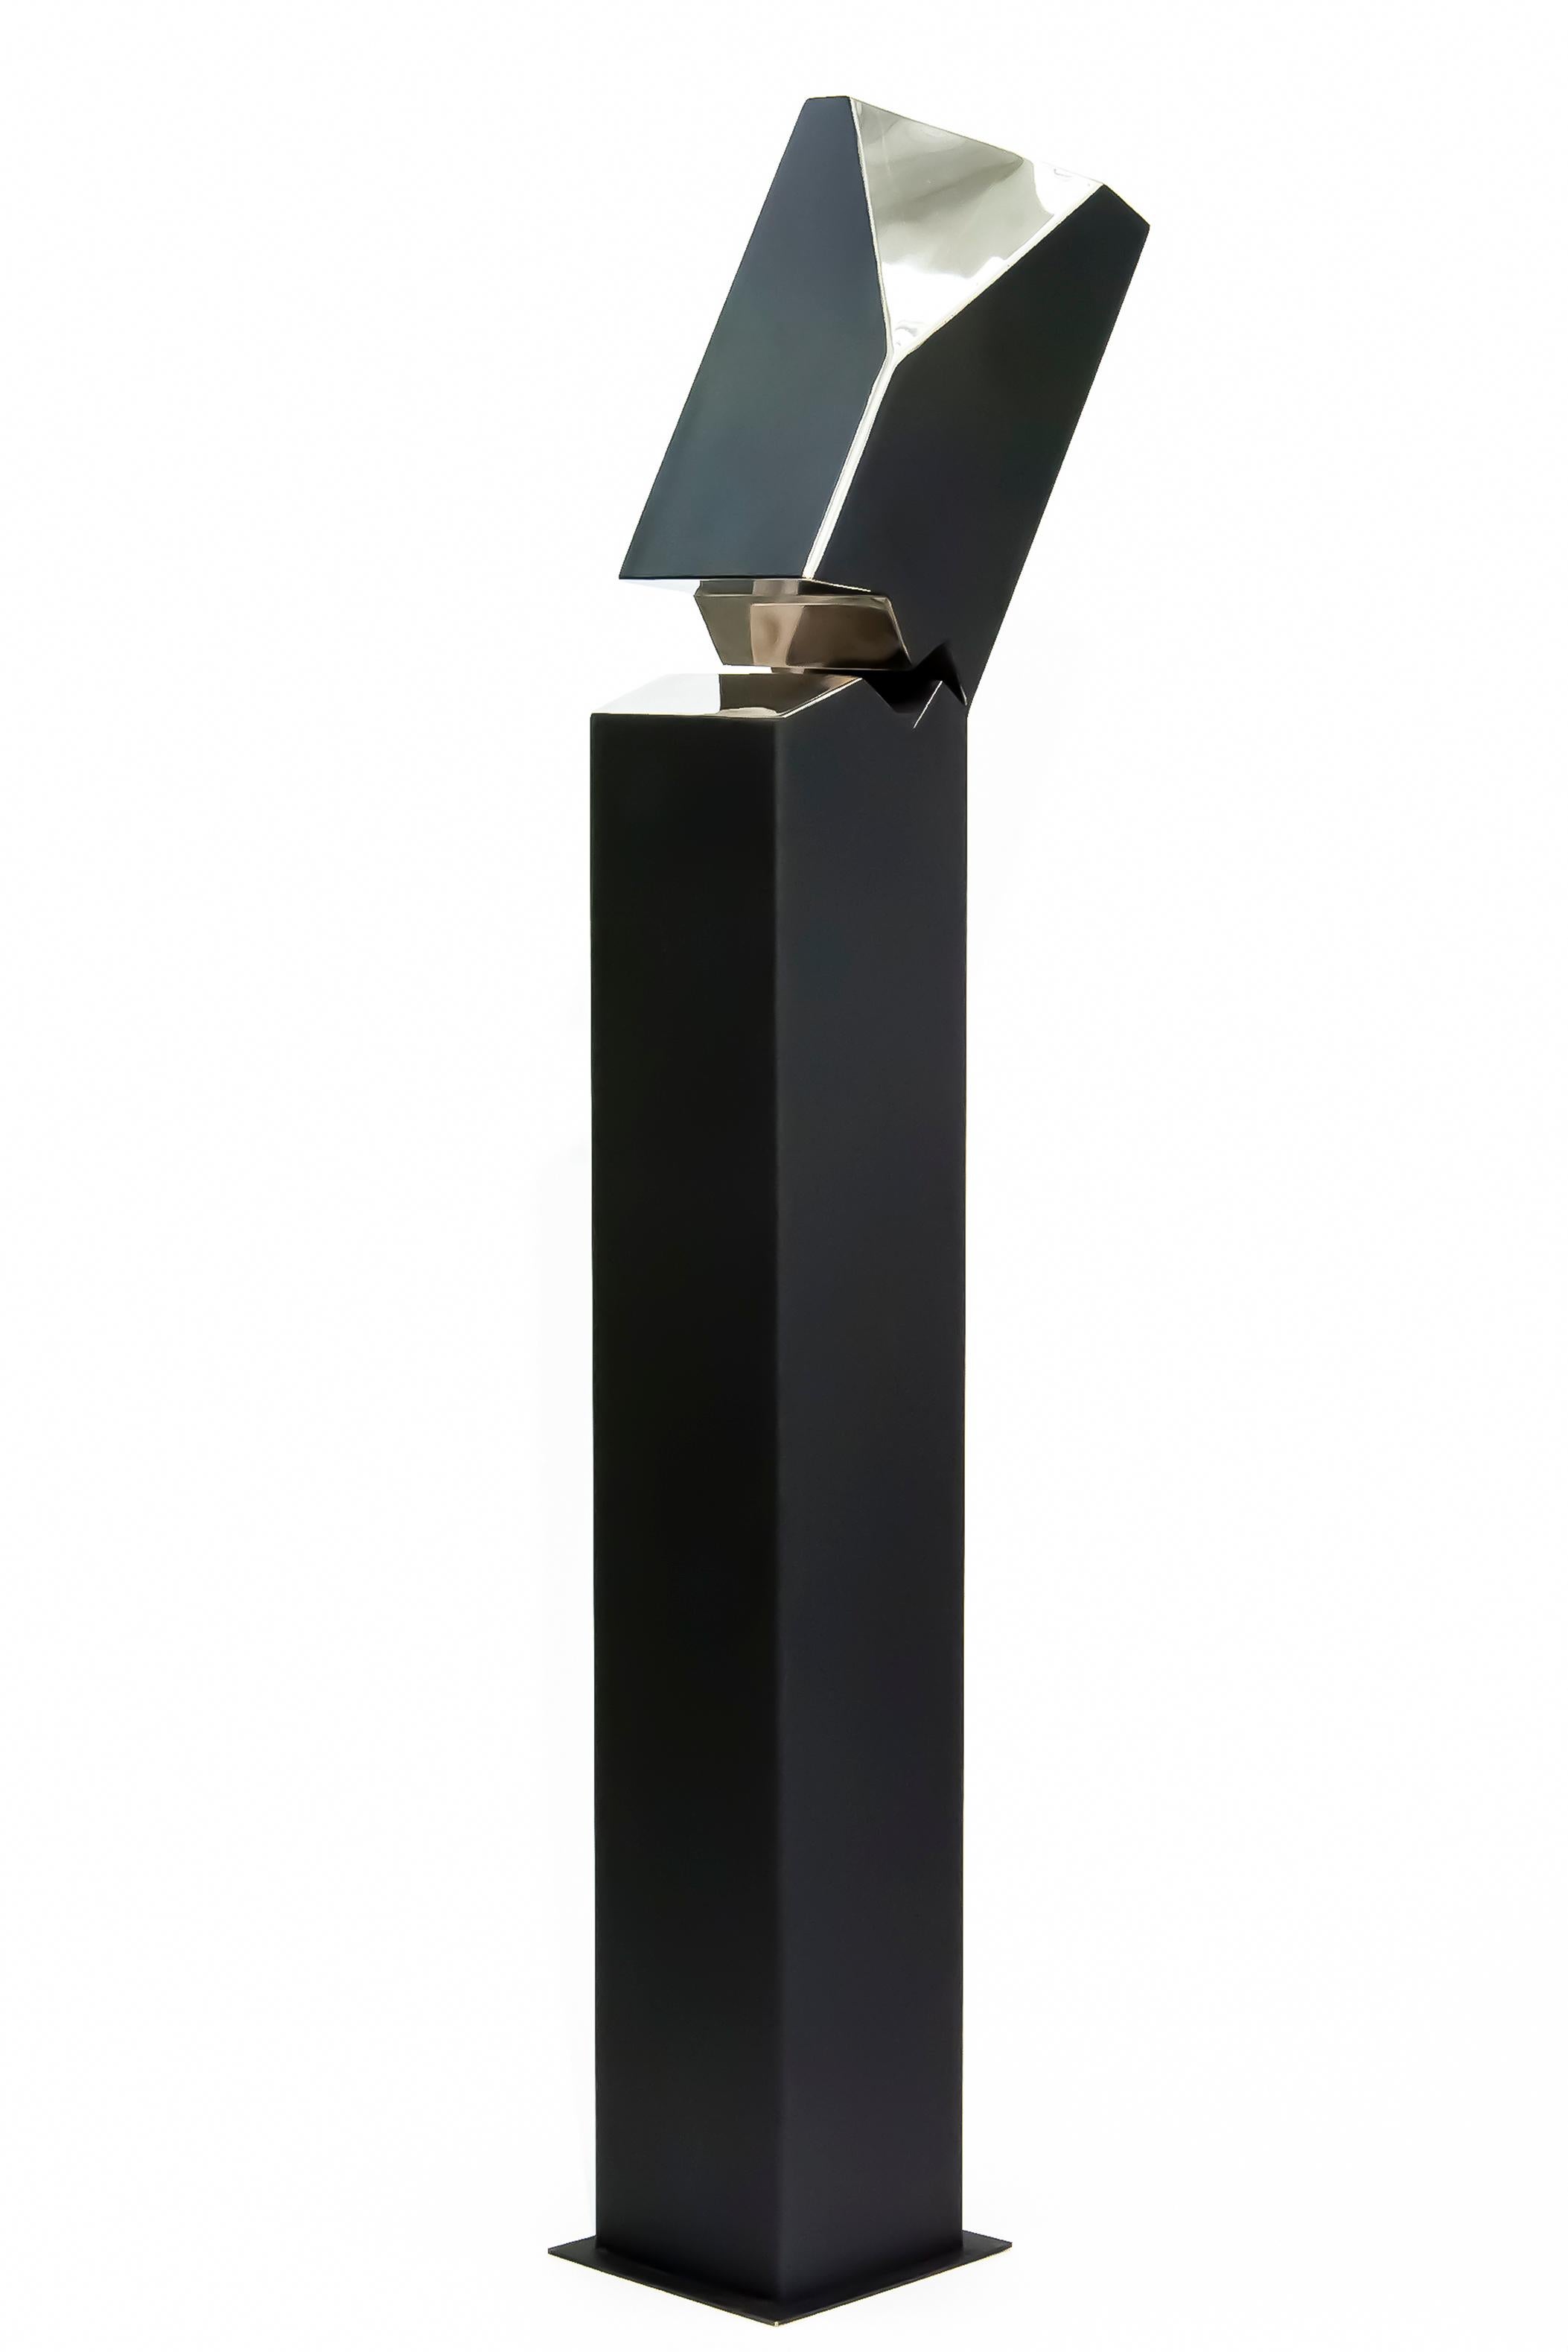 Philippe Pallafray Abstract Sculpture - Athabasca Black 2/10- tall, modern, geometric, contemporary, steel sculpture